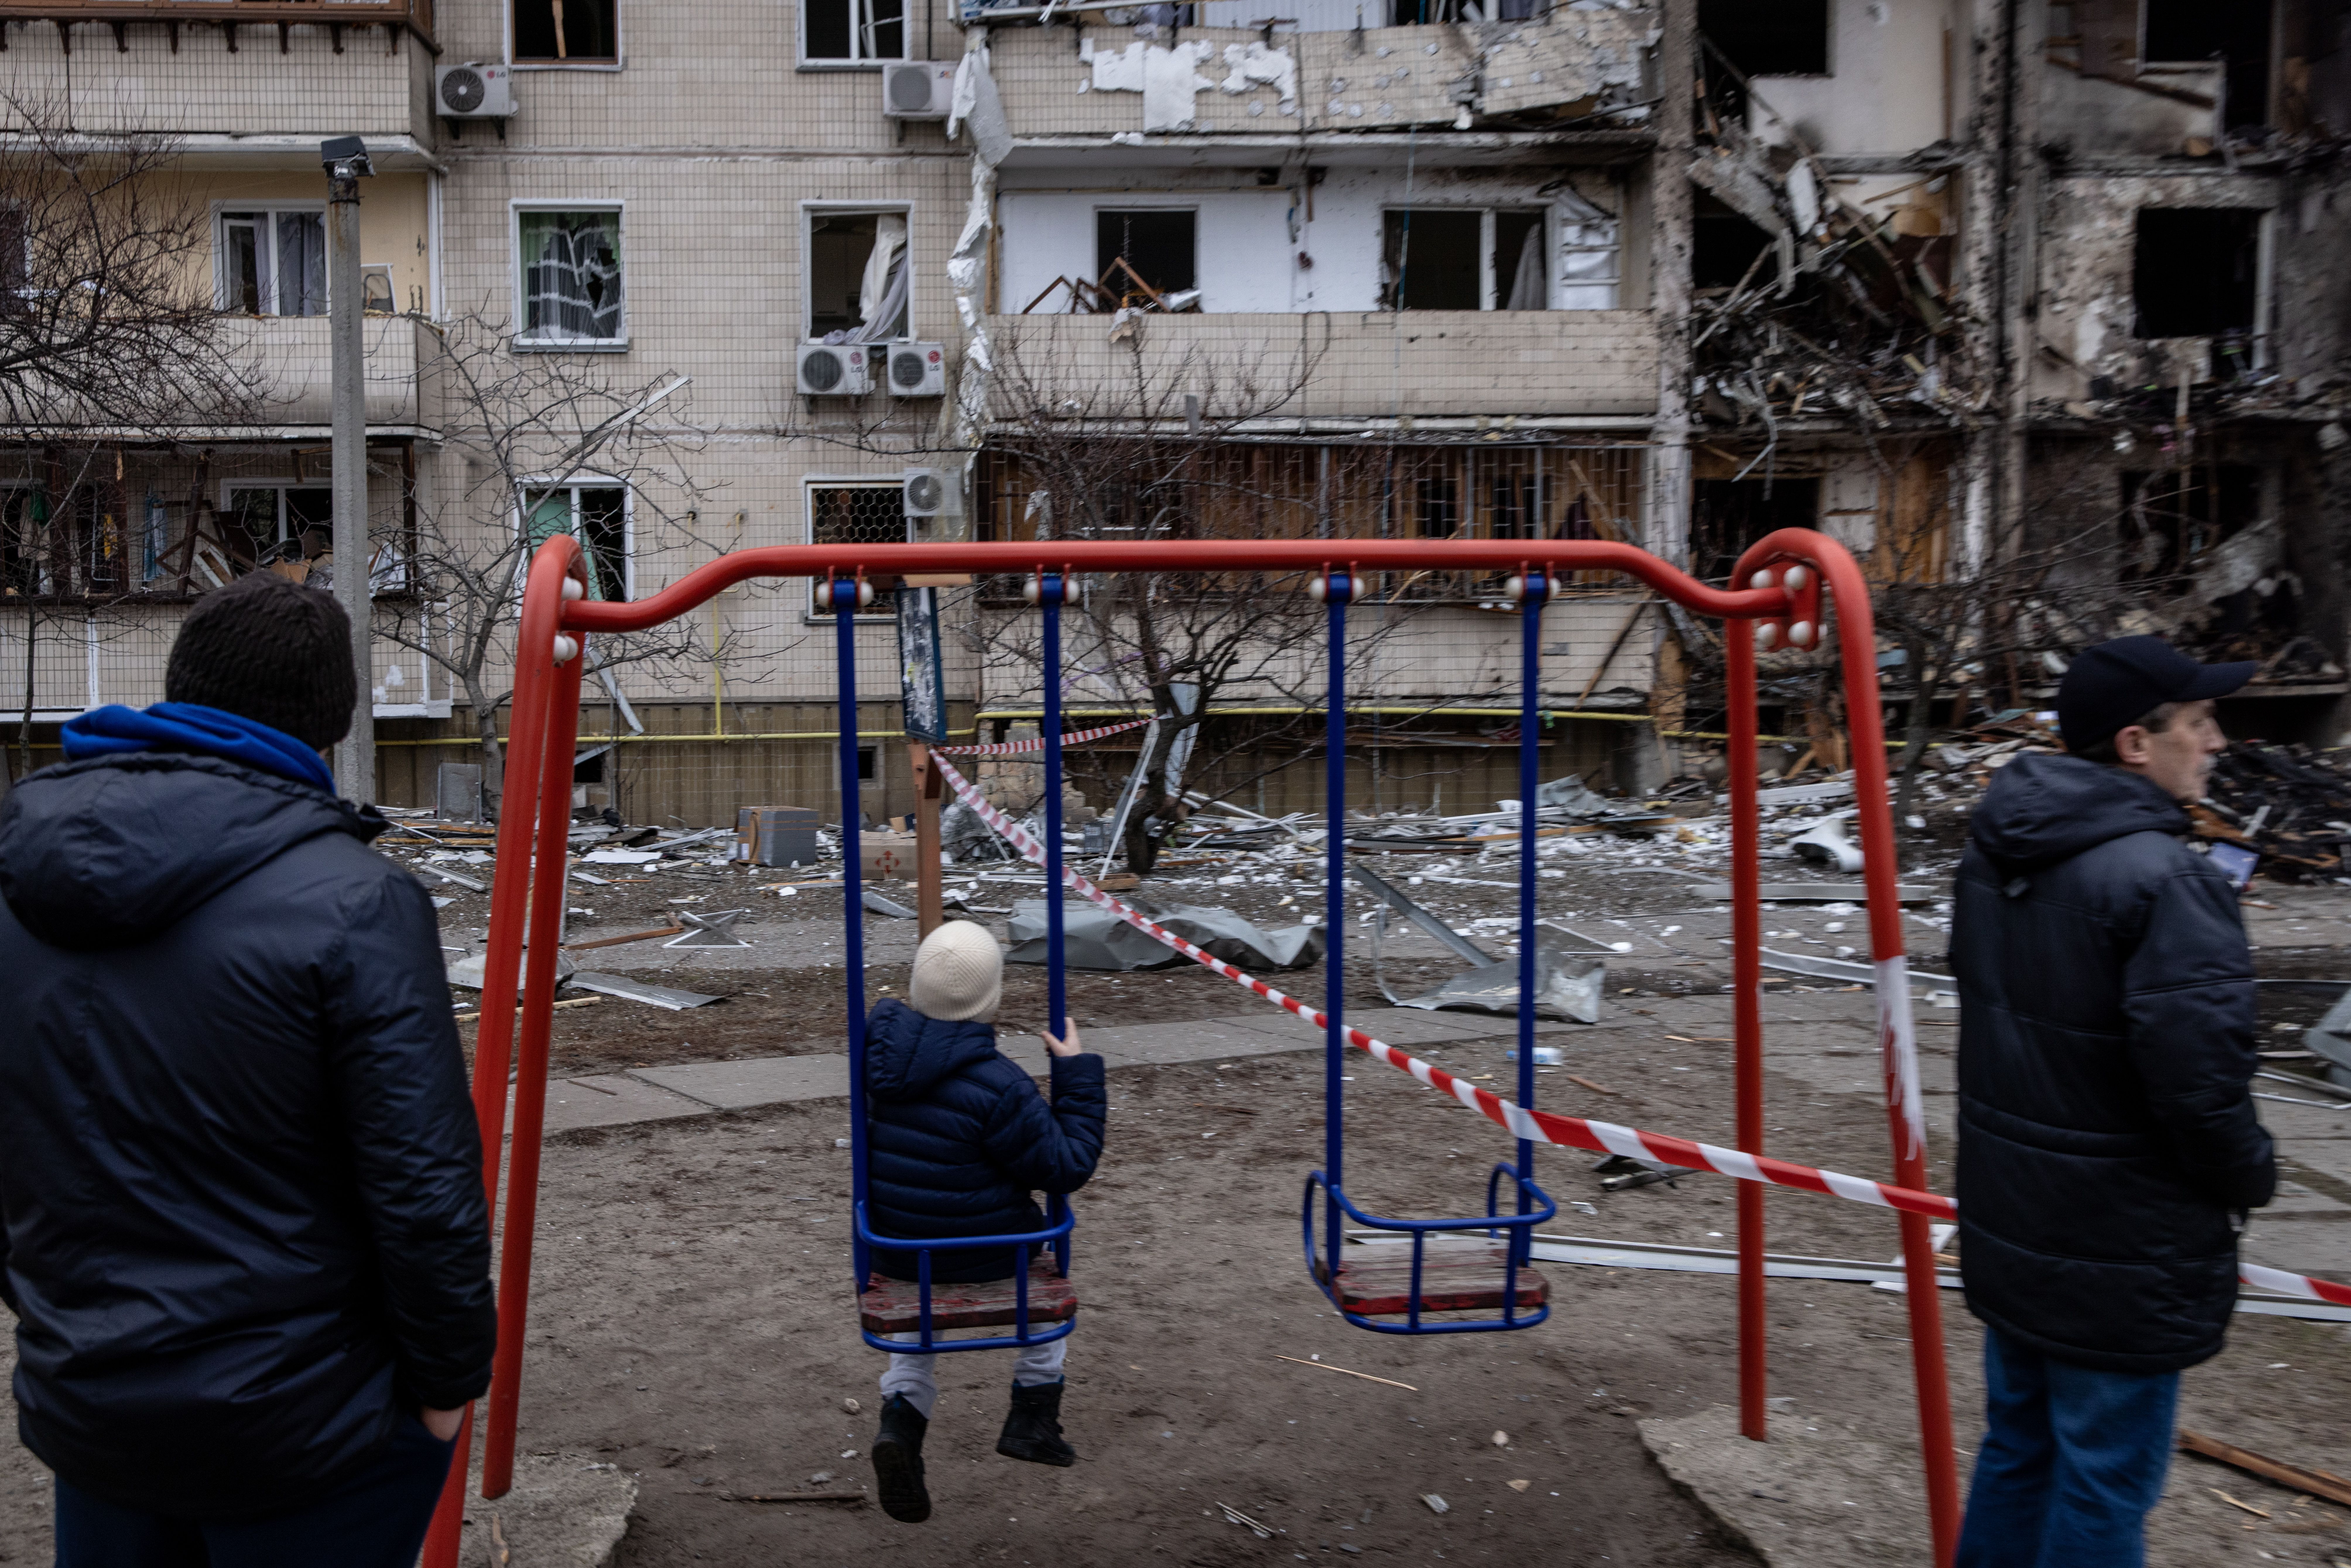 A boy plays on a swing in front of a damaged residential block hit by a missile strike on Feb. 25.